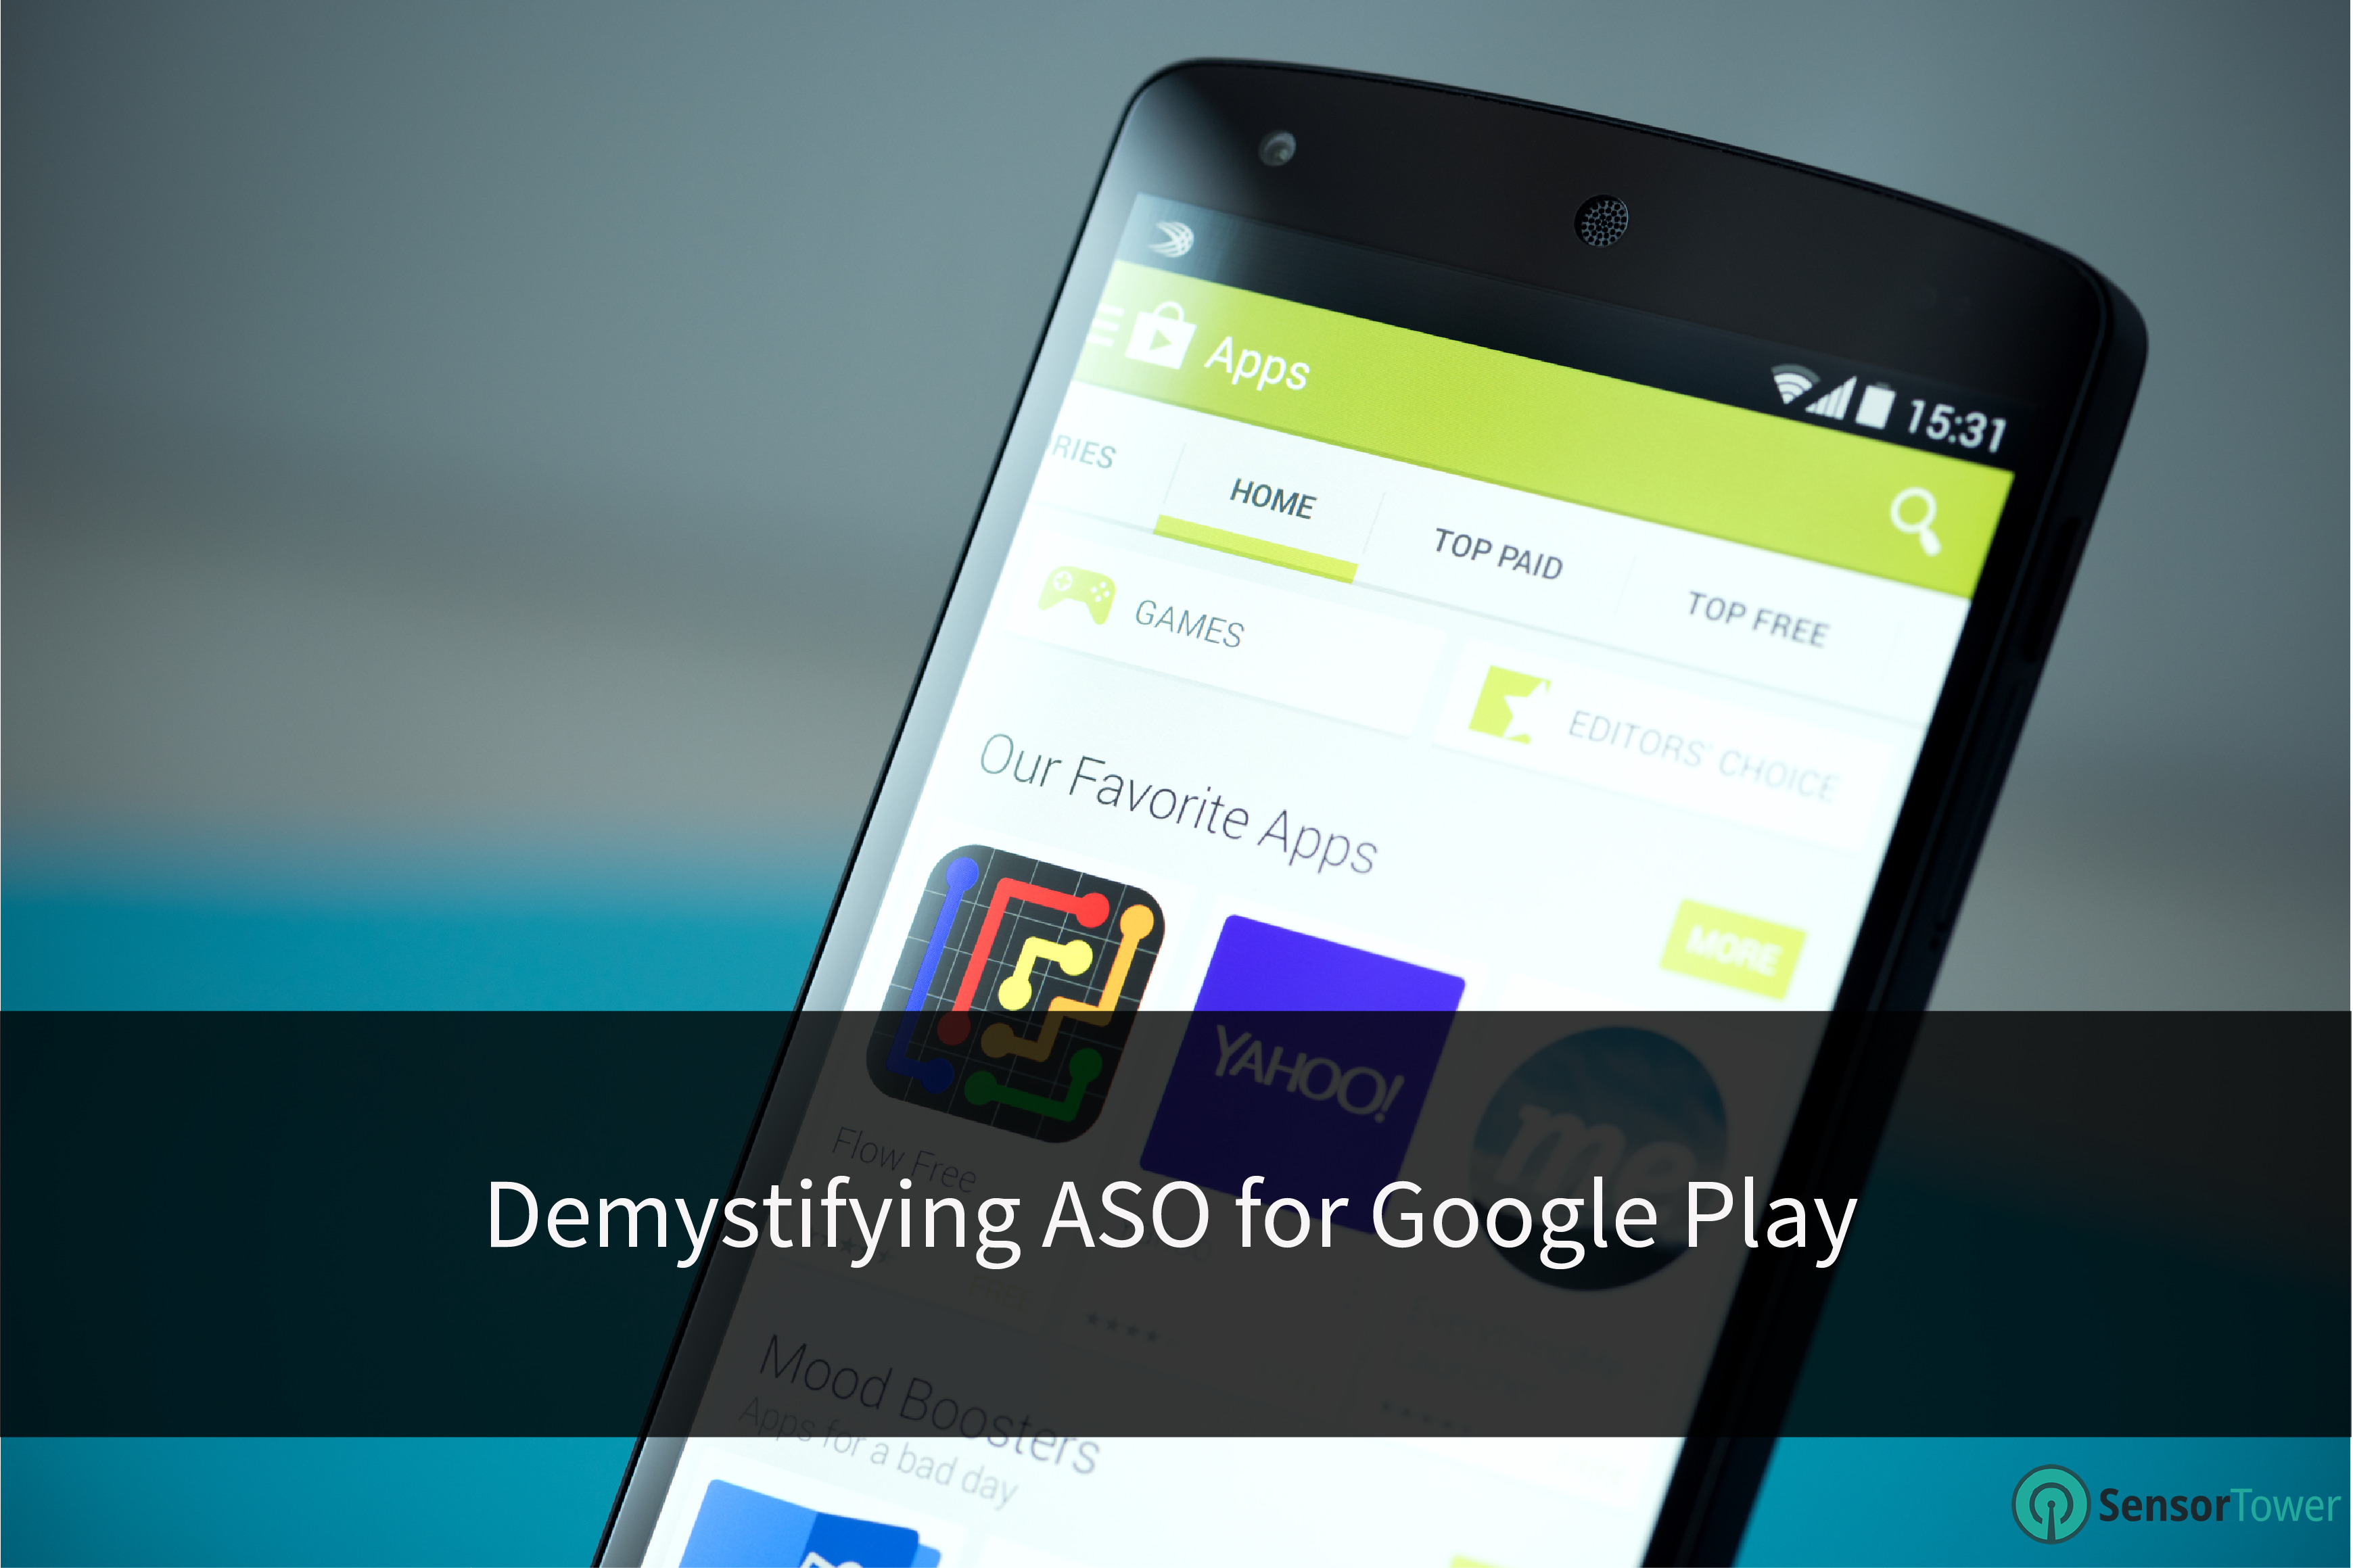 Demystifying ASO for Google Play